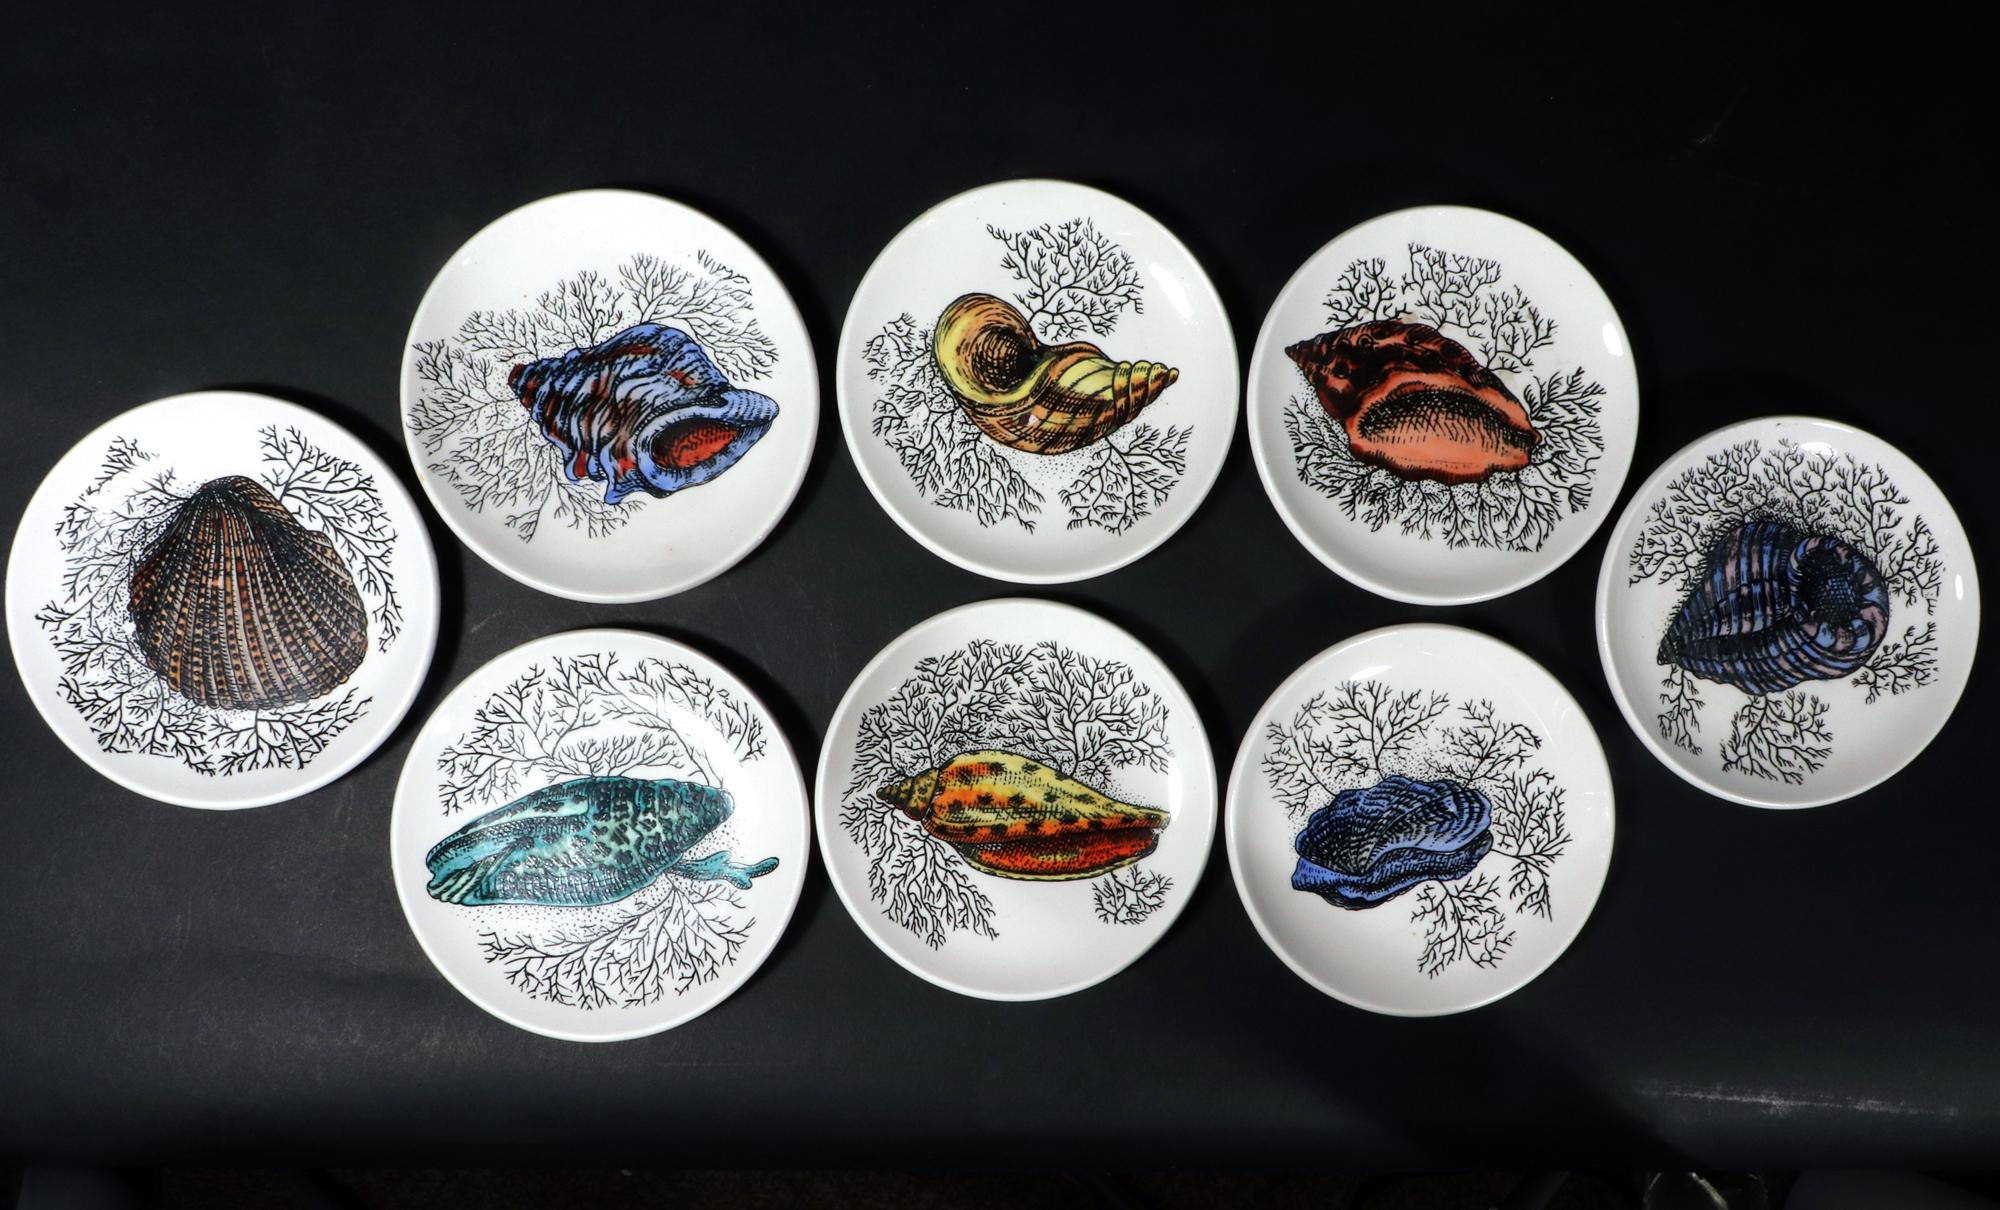 Mid-century Modern Ceramic Coasters decorated with Sea Shells,
Possibly Bucciarelli,
1960s.

The complete set of eight coasters are each decorated with a different colored sea shell amongst black seaweed.

Dimensions: 4 1/8 inches wide x 1/2 inch